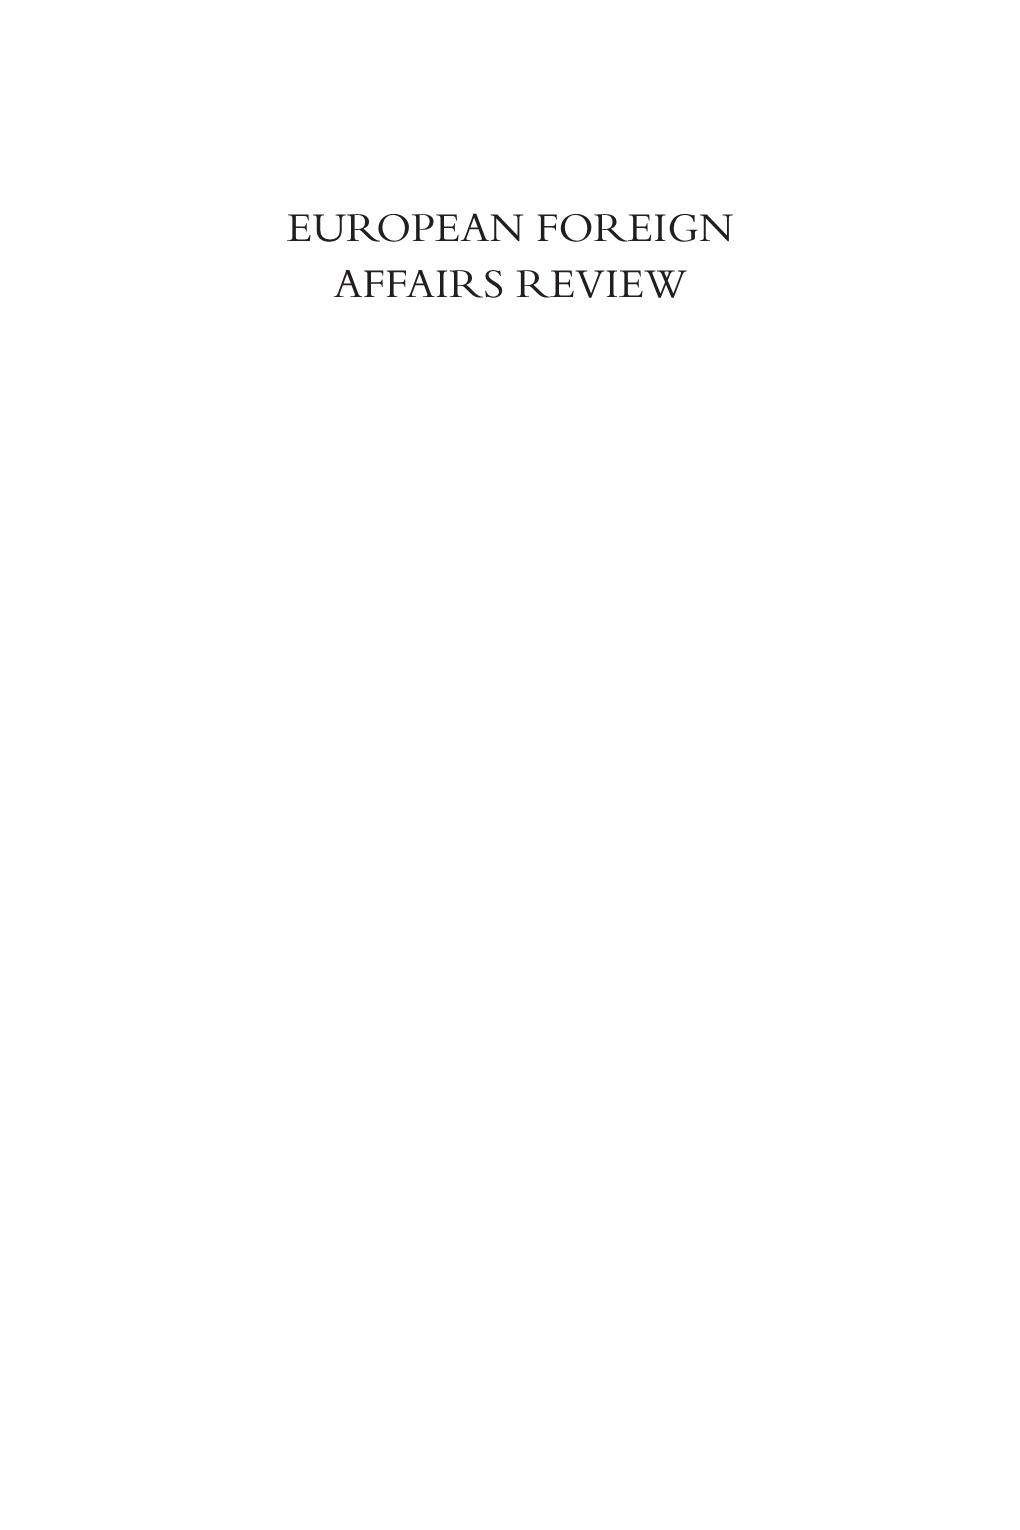 EUROPEAN FOREIGN AFFAIRS REVIEW Published By: Kluwer Law International P.O